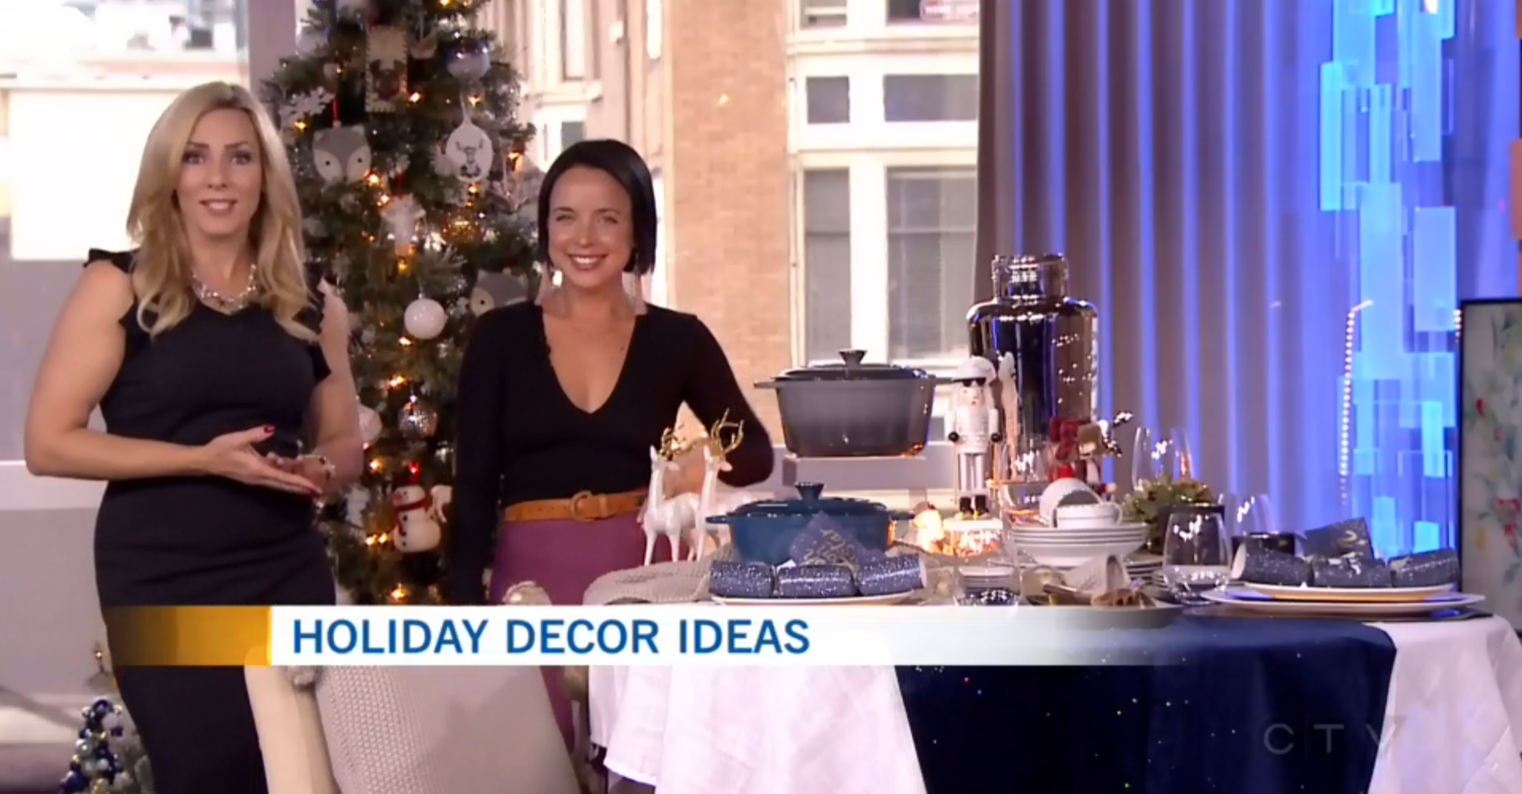 CTV Morning Live: Decor Tips for Chic Holiday Entertaining